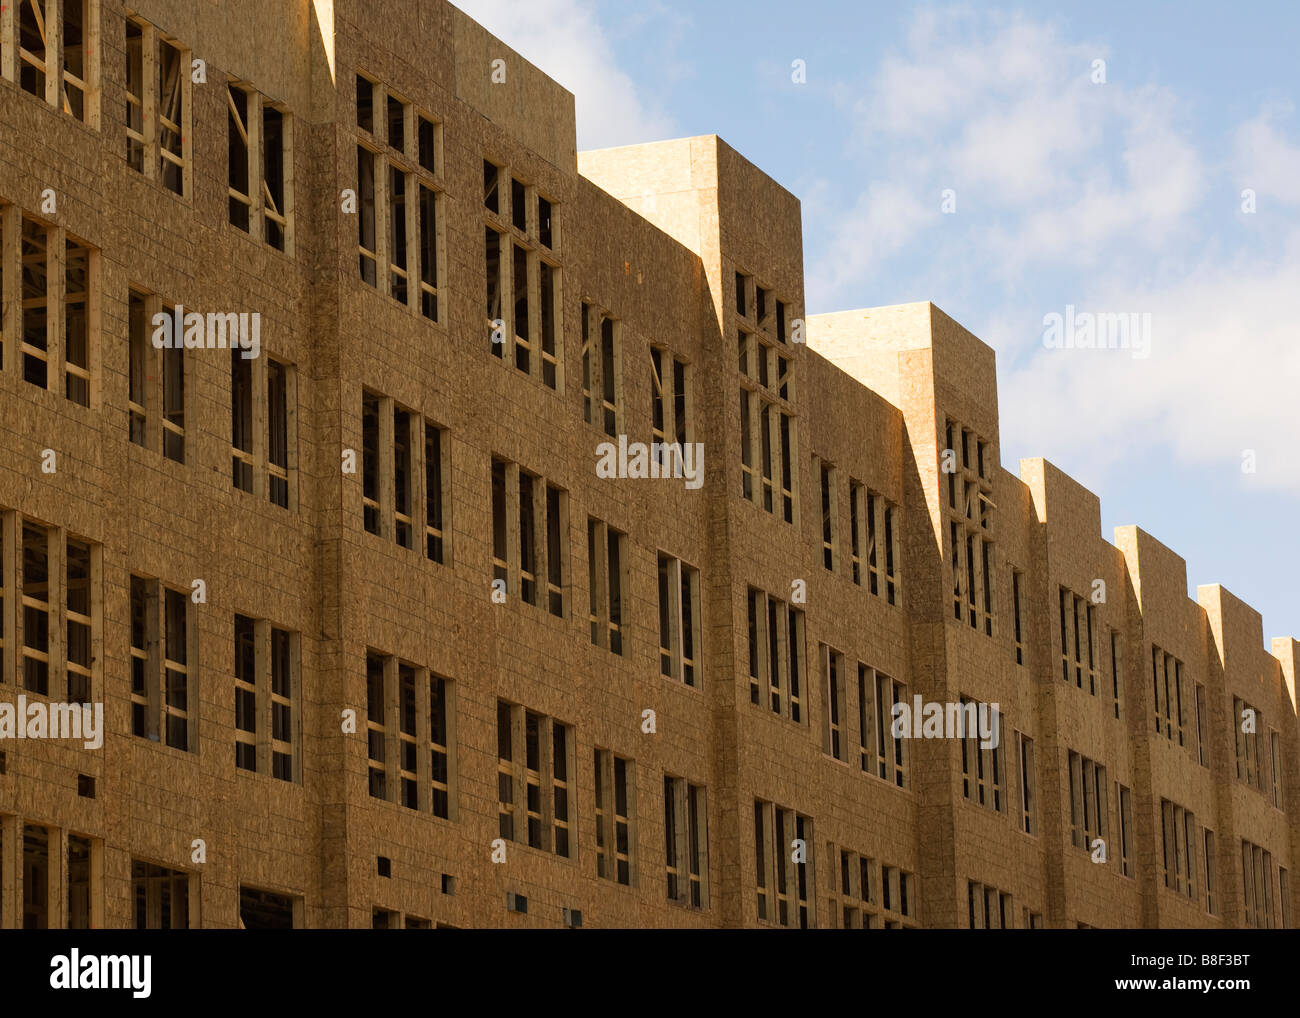 Wooden building Stock Photo